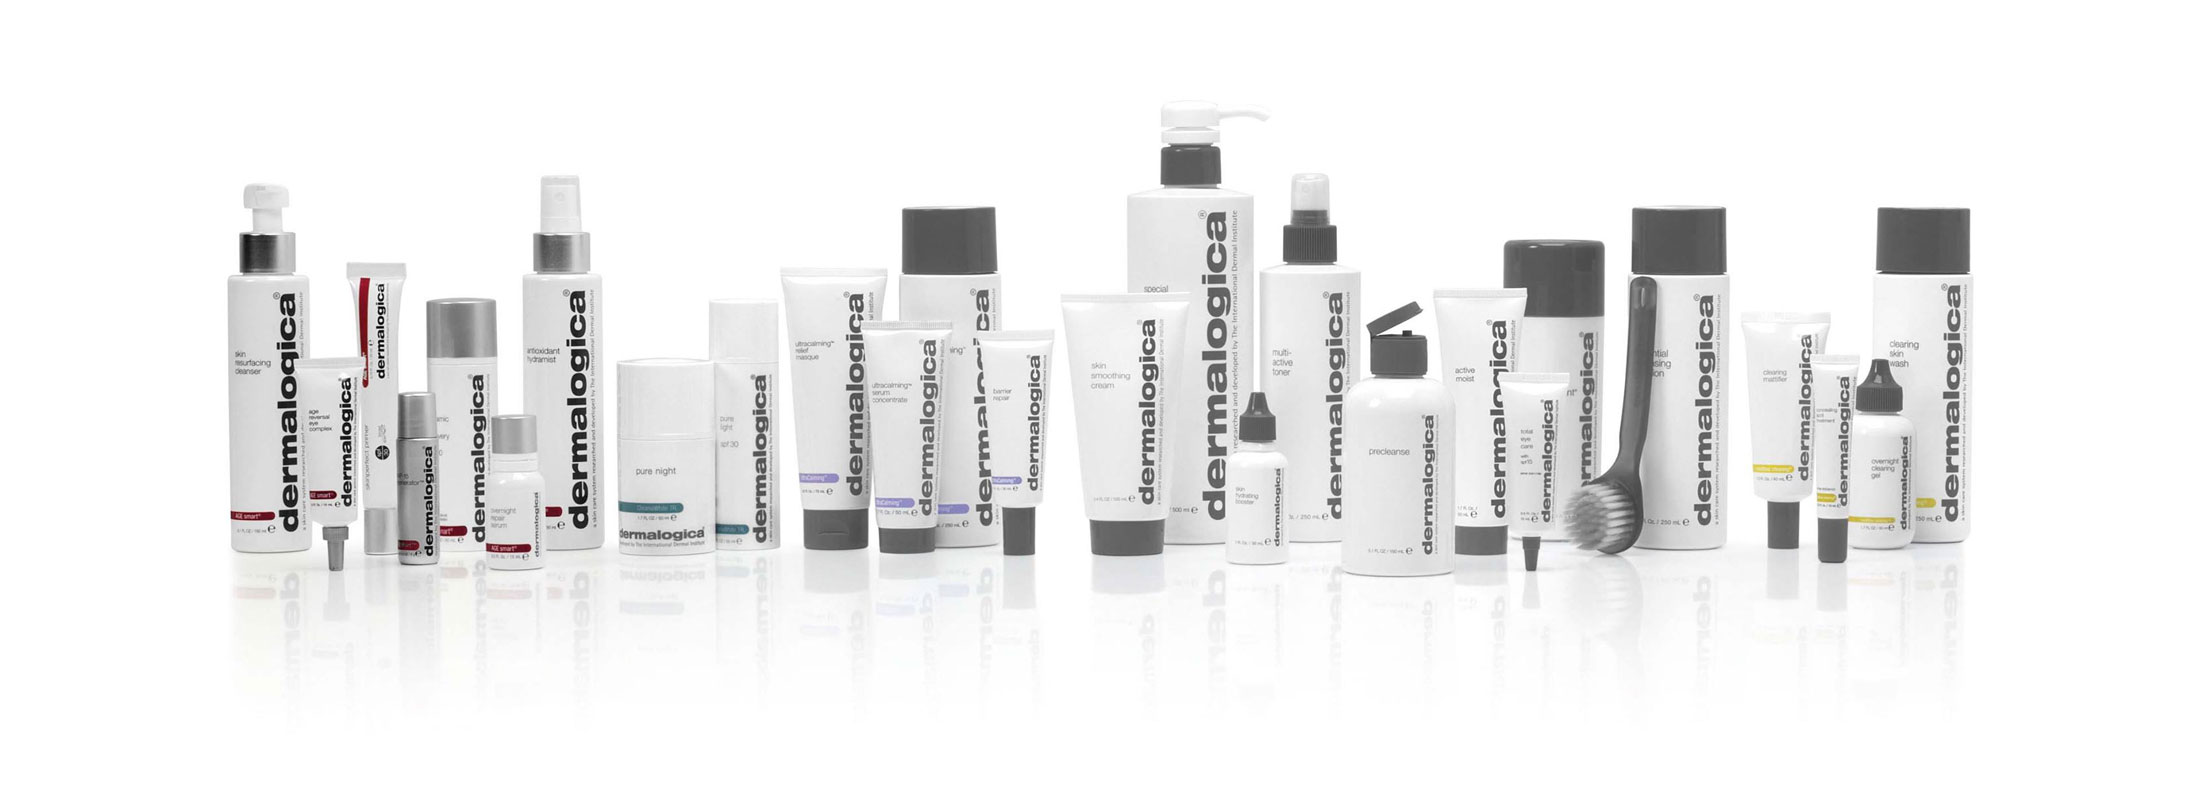 Dermalogica product overview